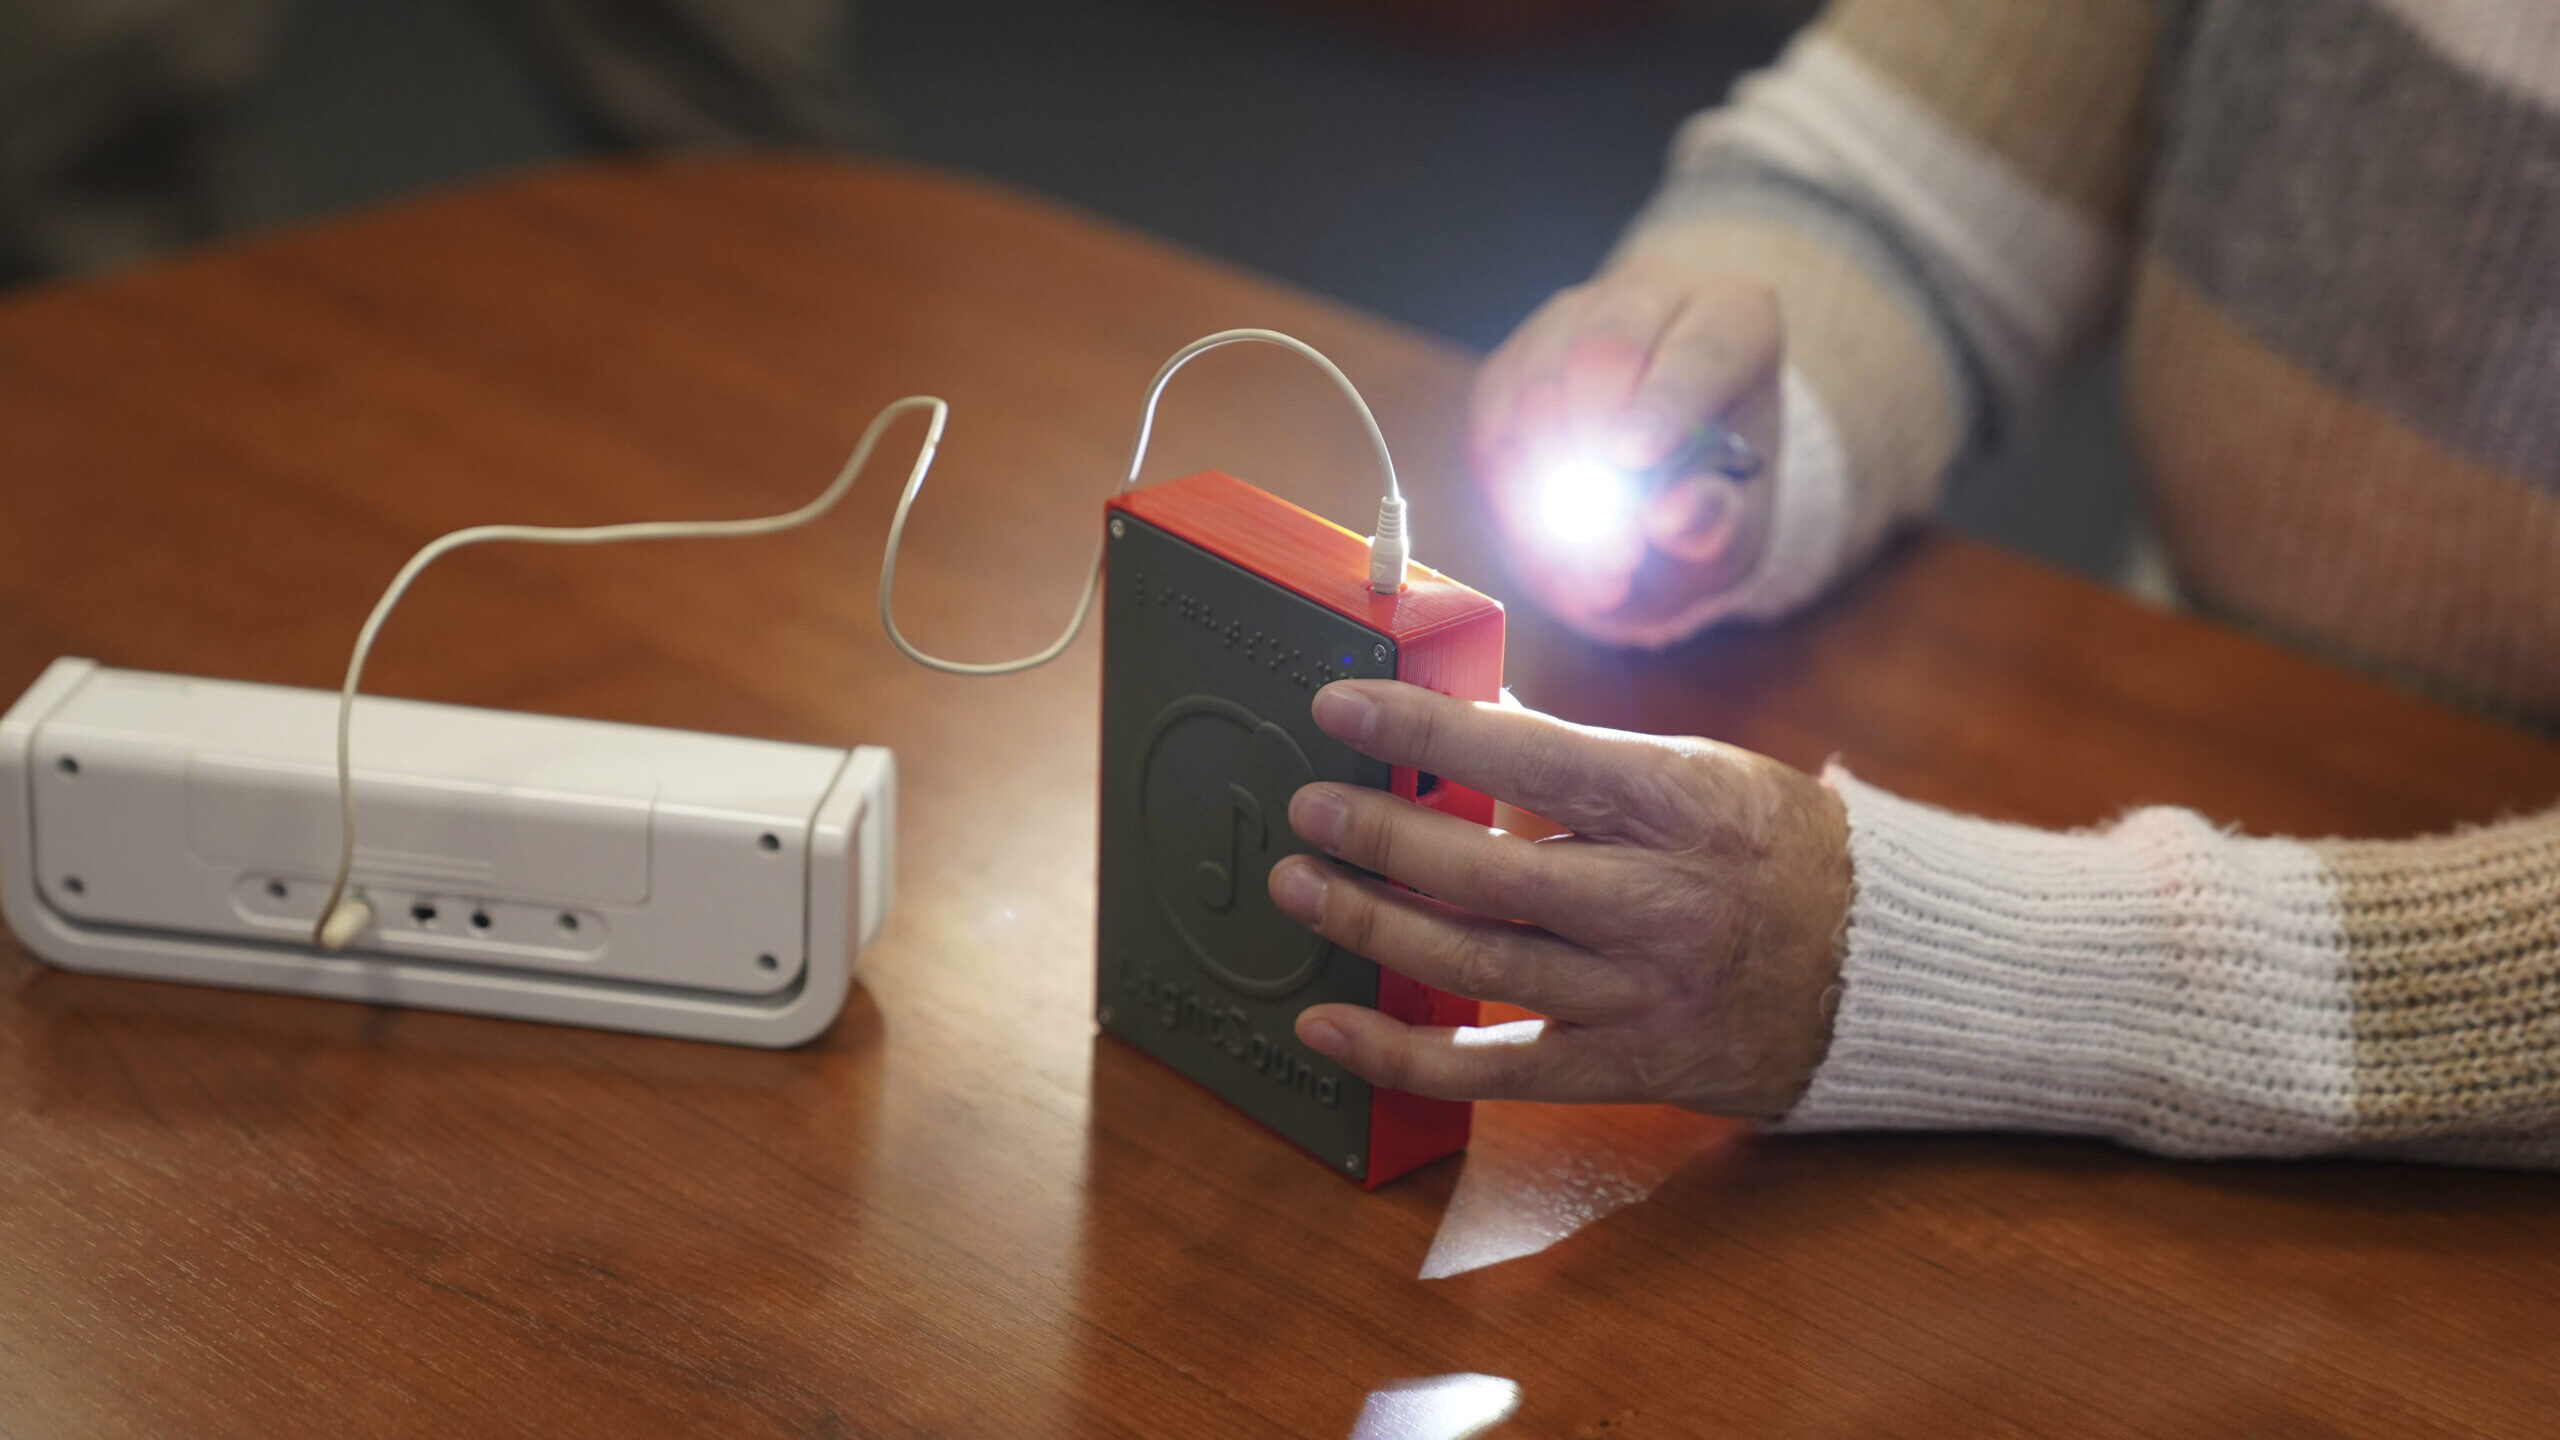 Minh Ha, assistive technology manager at the Perkins School for the Blind uses a flashlight to try ...